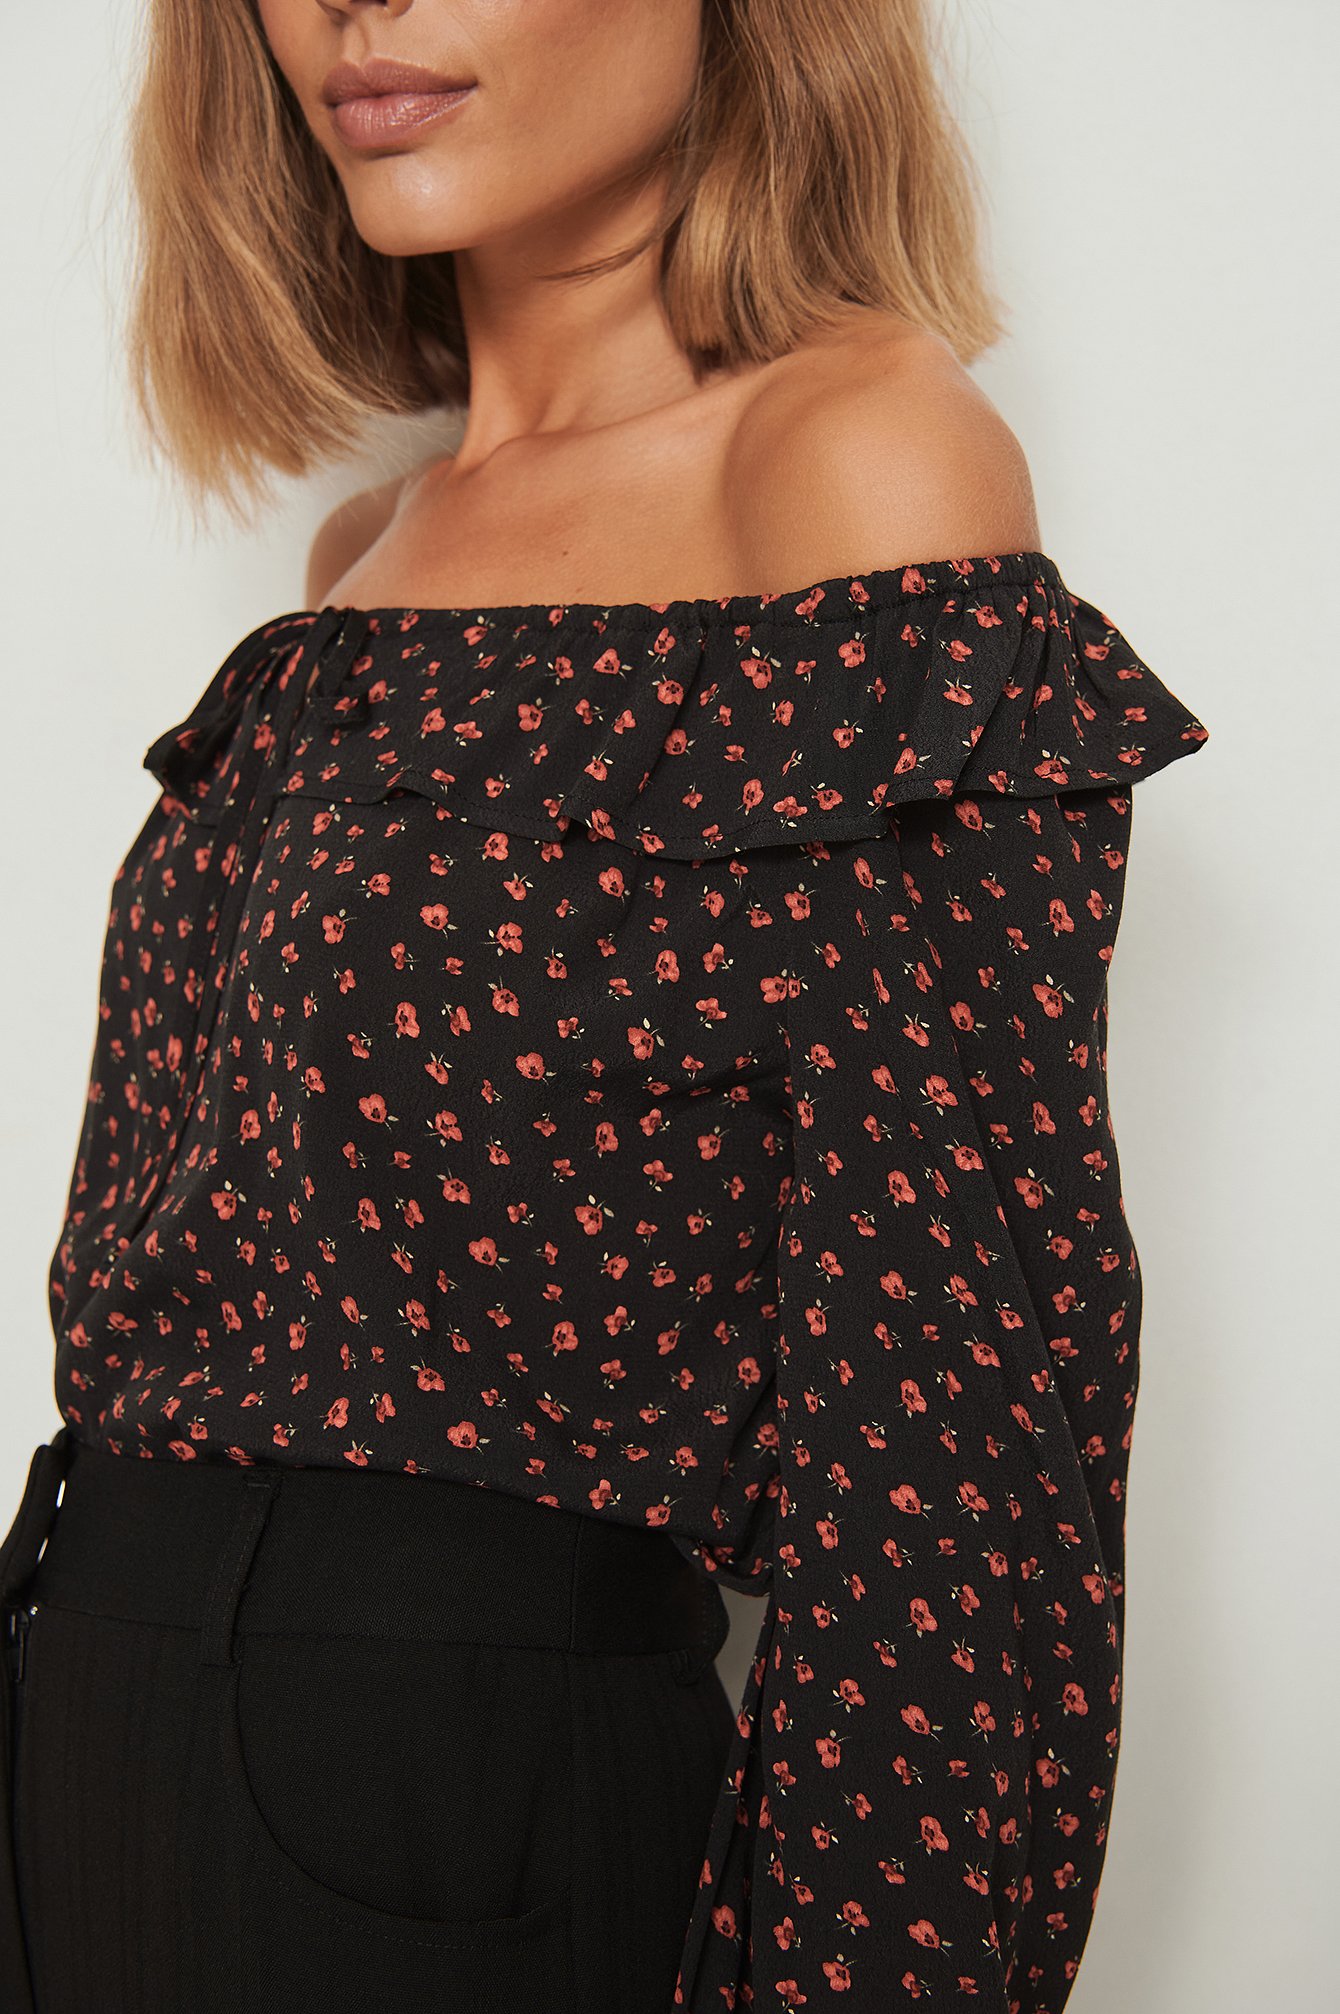 Small Red Flowers Long Sleeve Flounce Blouse